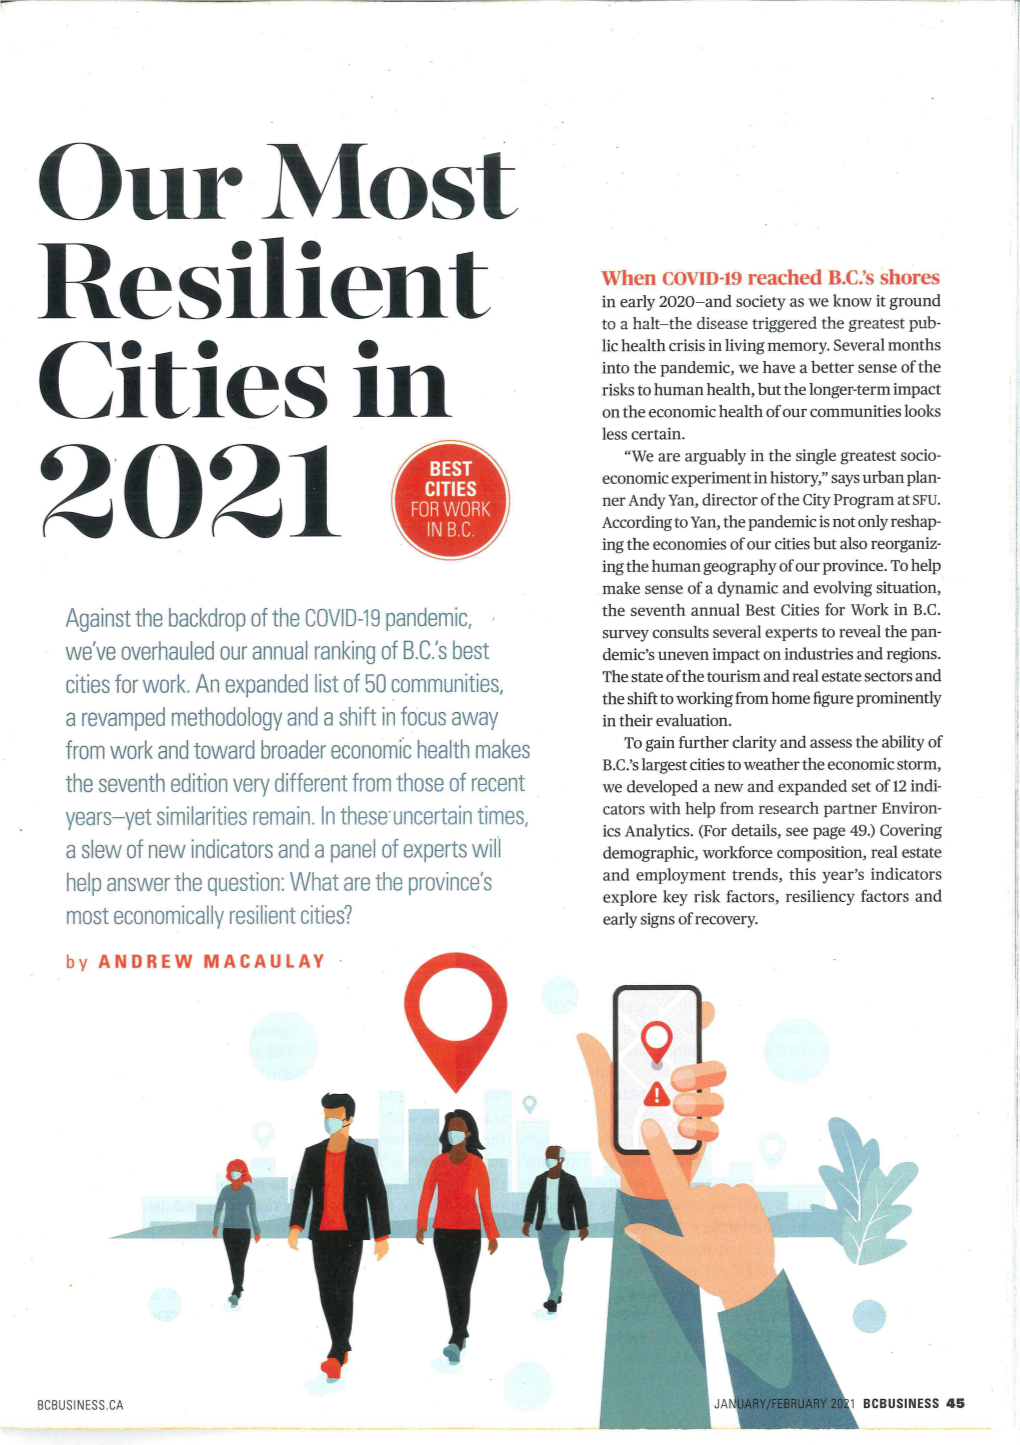 Our Most Resilient Cities In